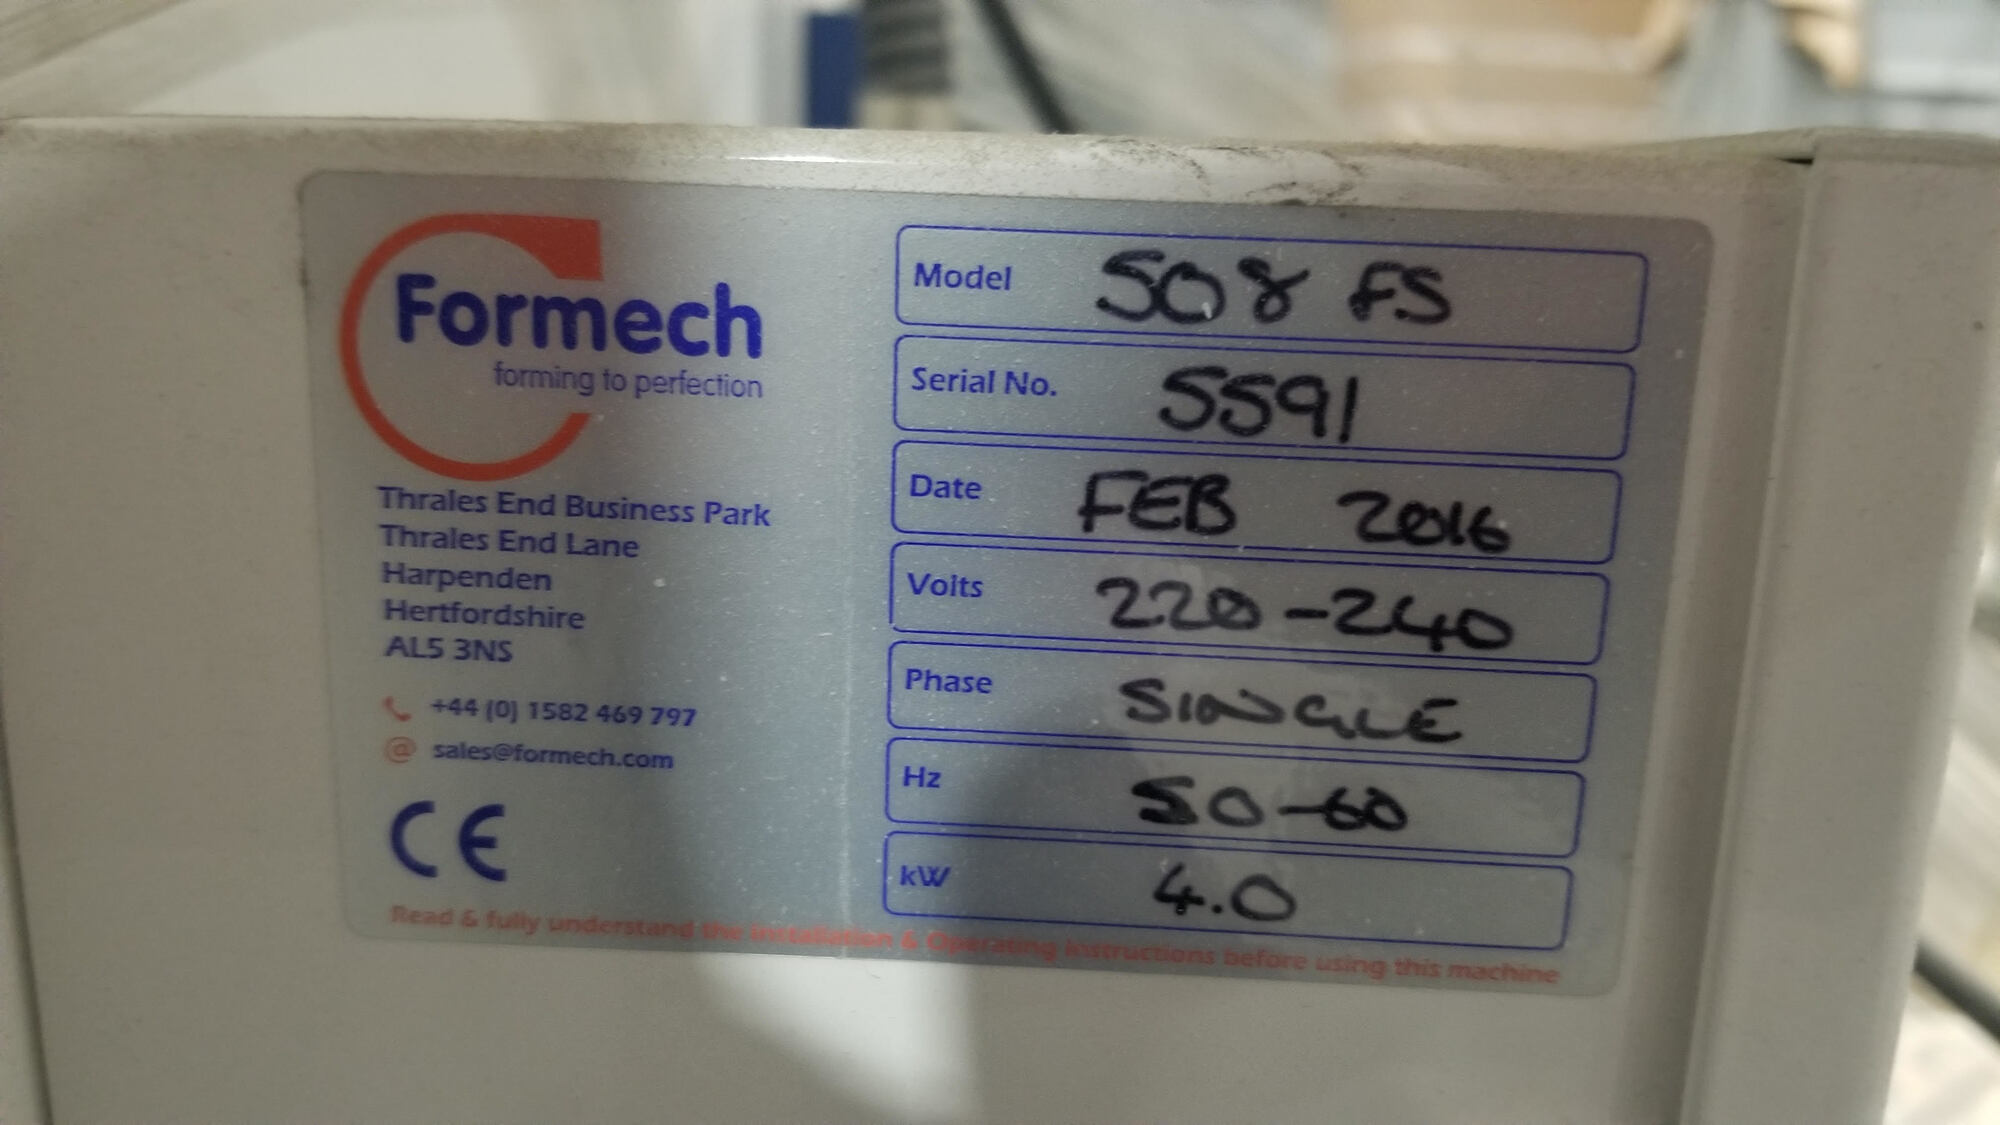 2016 Formech 508FS New Formech Thermoformers | CNC Router Store